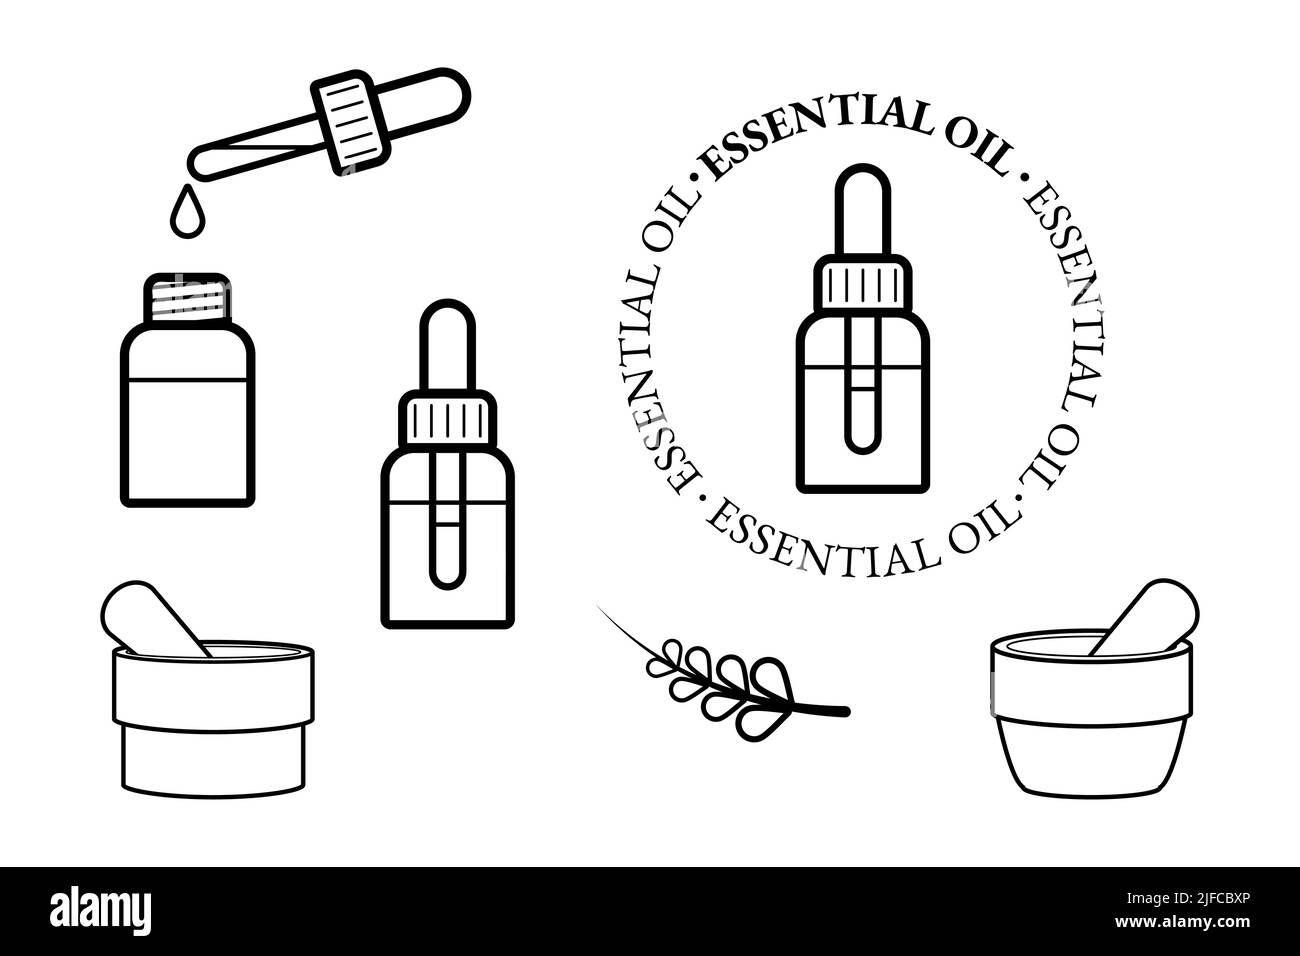 Essential oil icon set. Aromatherapy and cosmetic oil symbol. Line style vector illustration Stock Vector